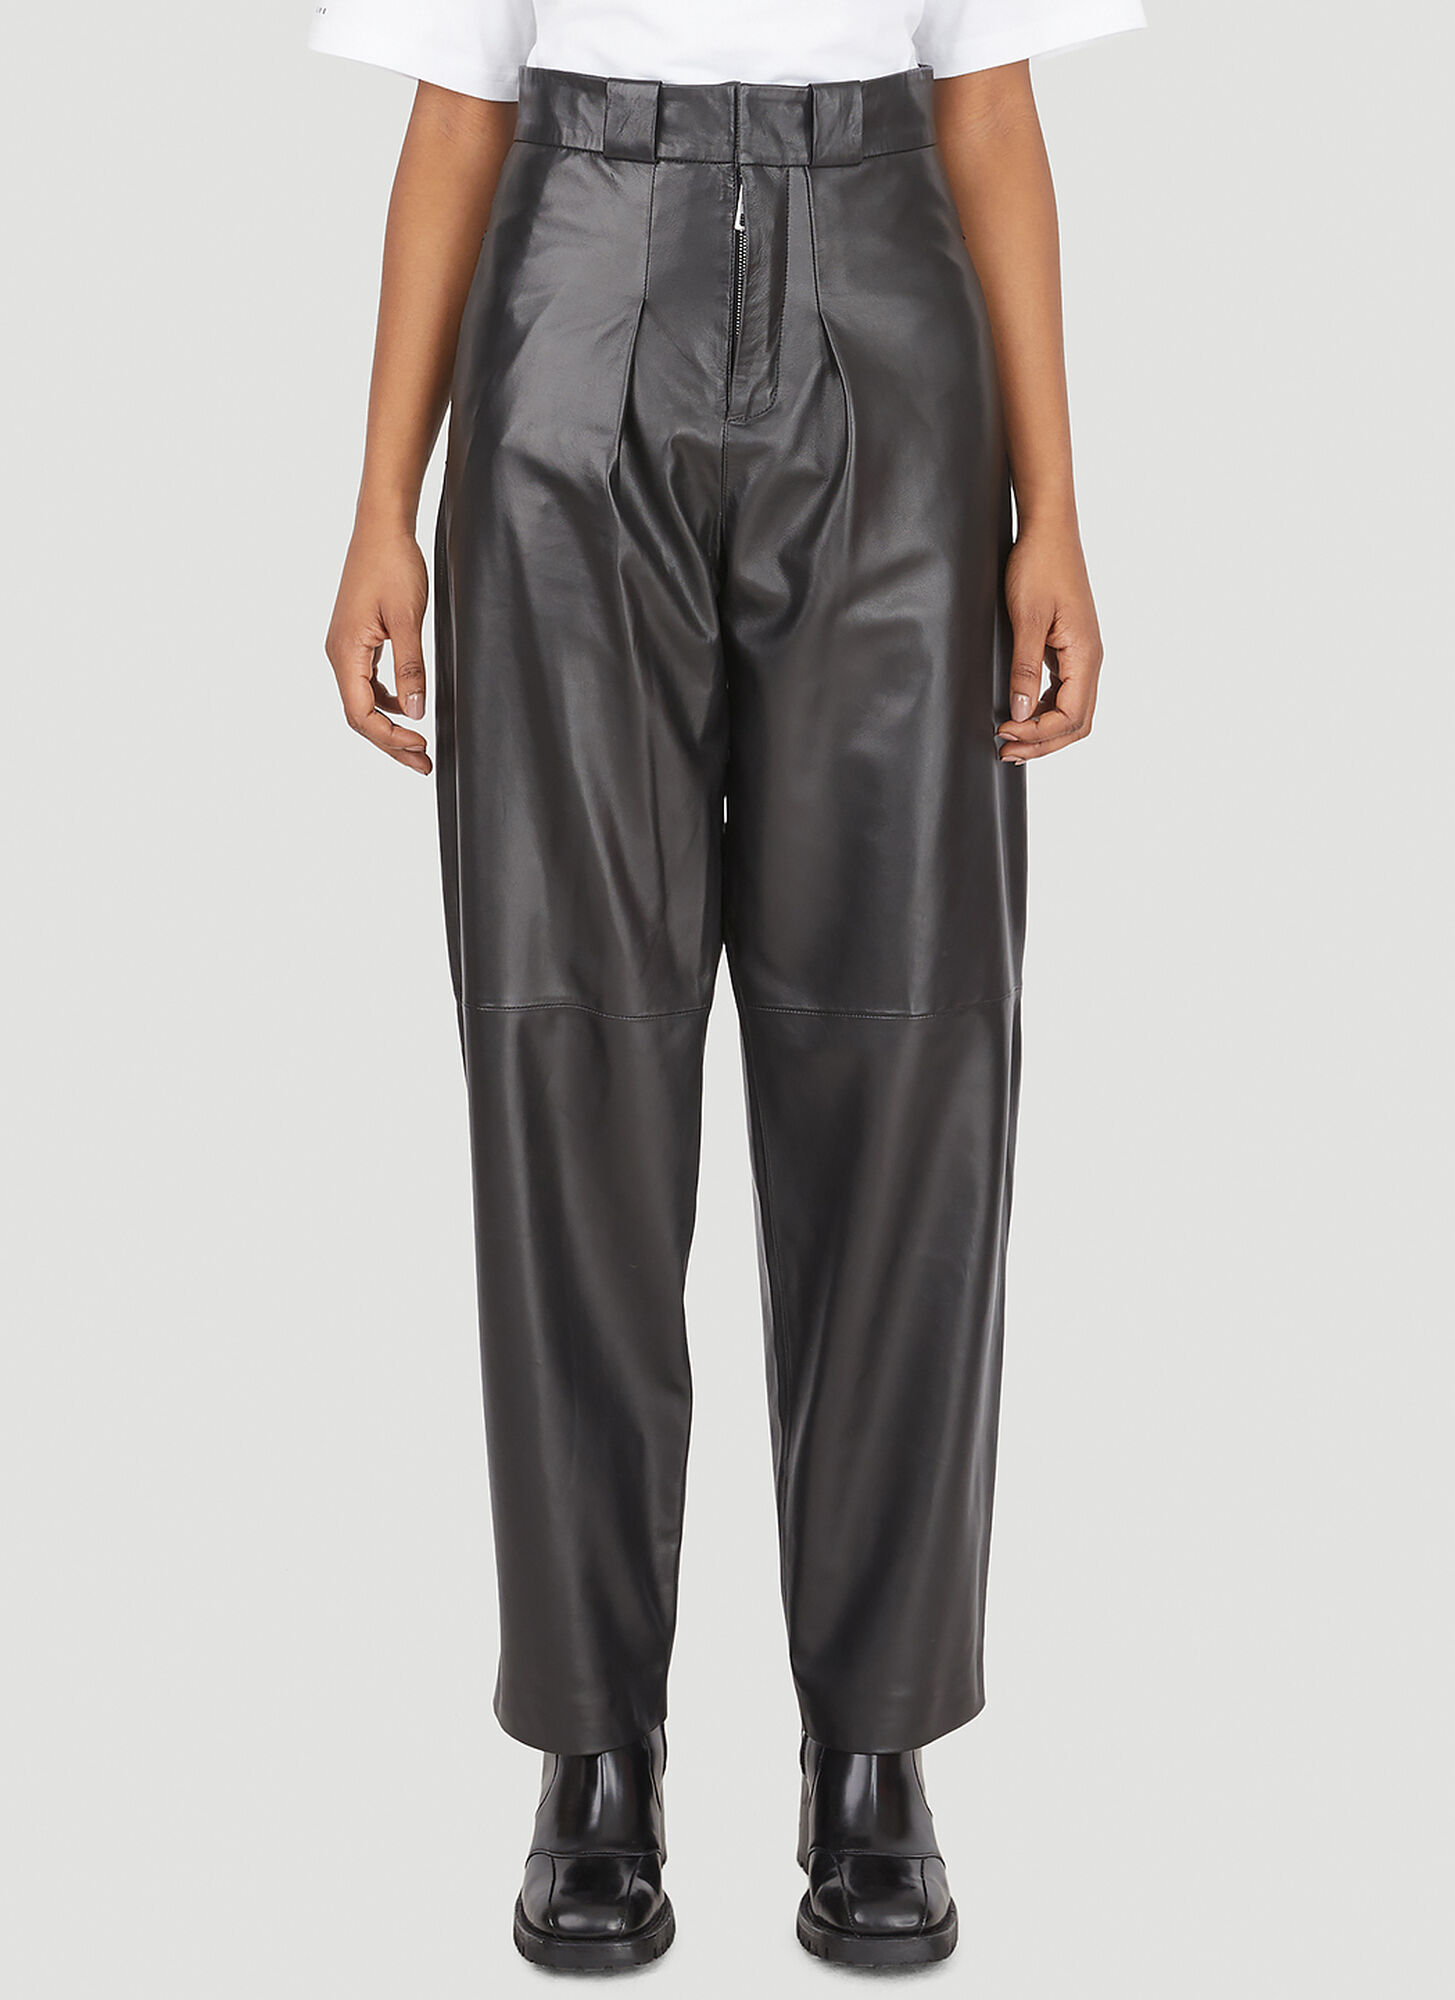 Common Leisure Chiller Pants In Black